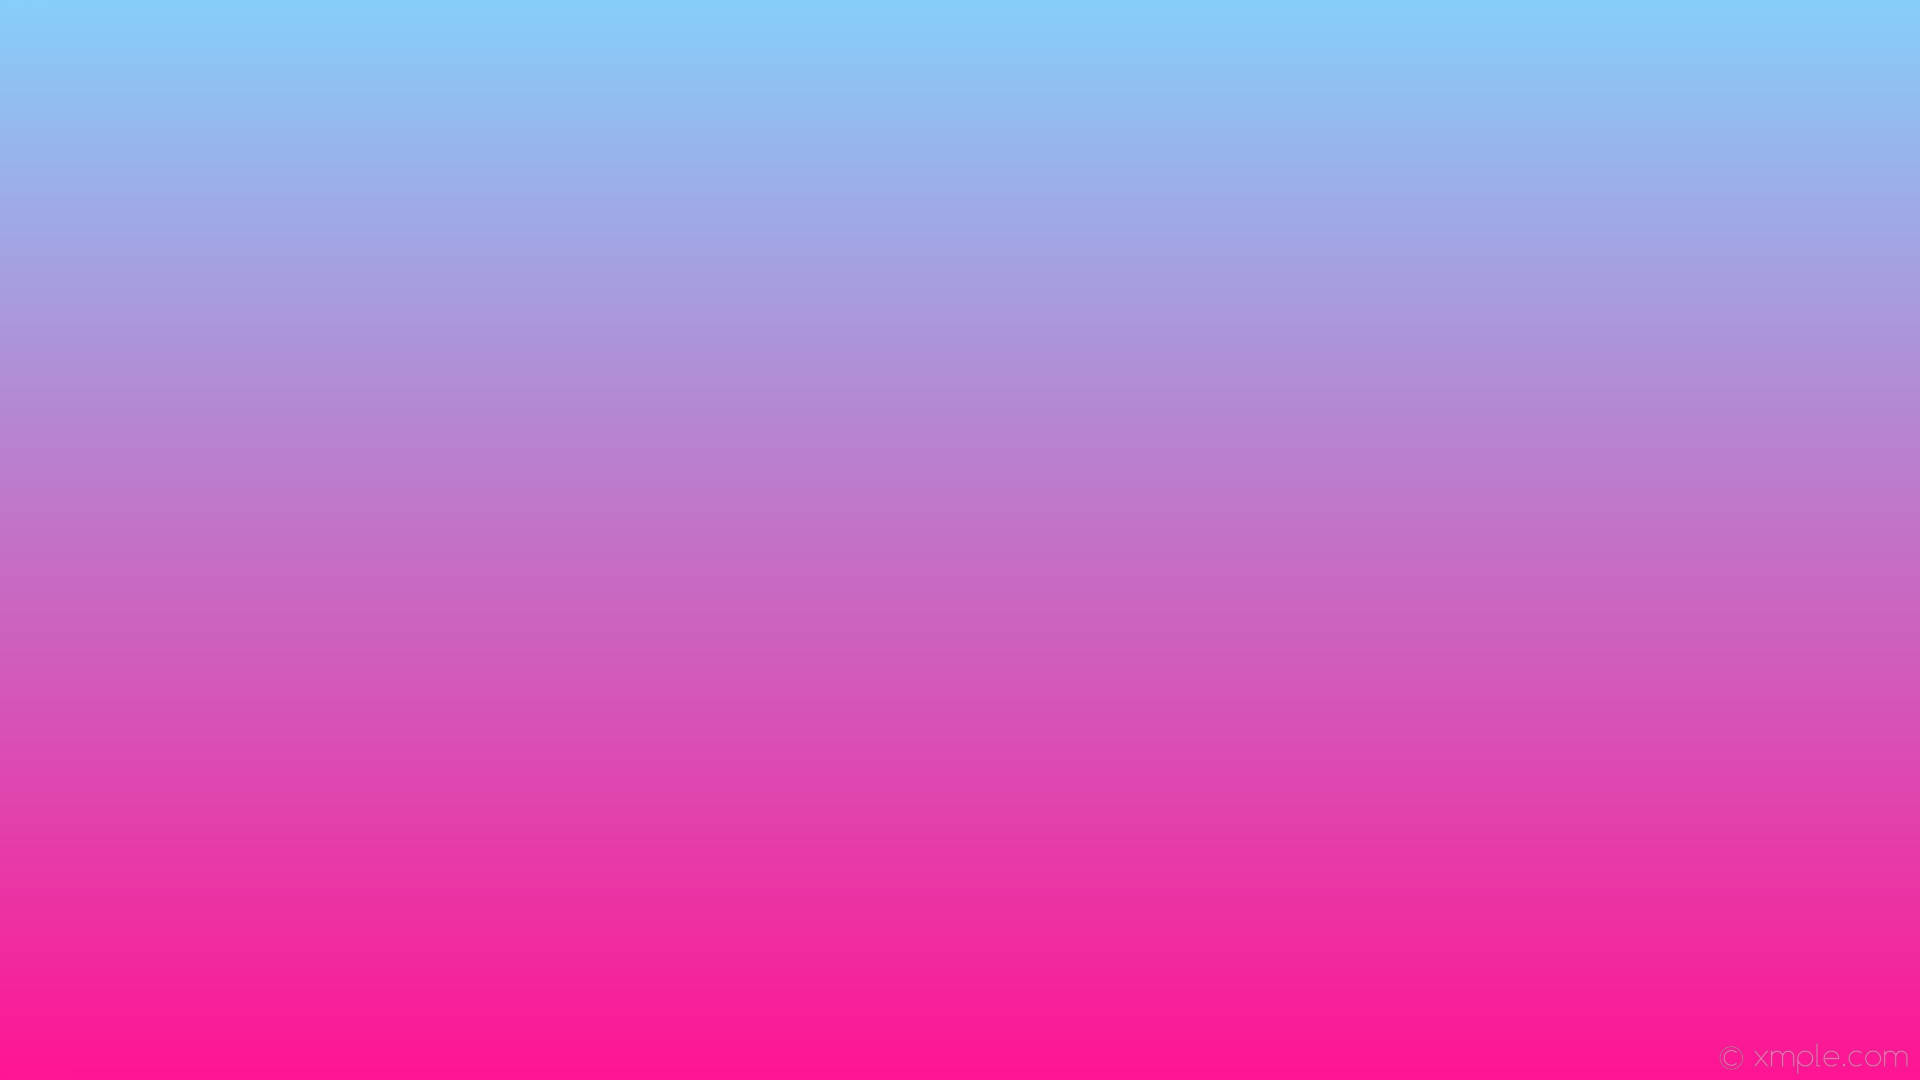 Bright Pink And Blue Gradient Picture